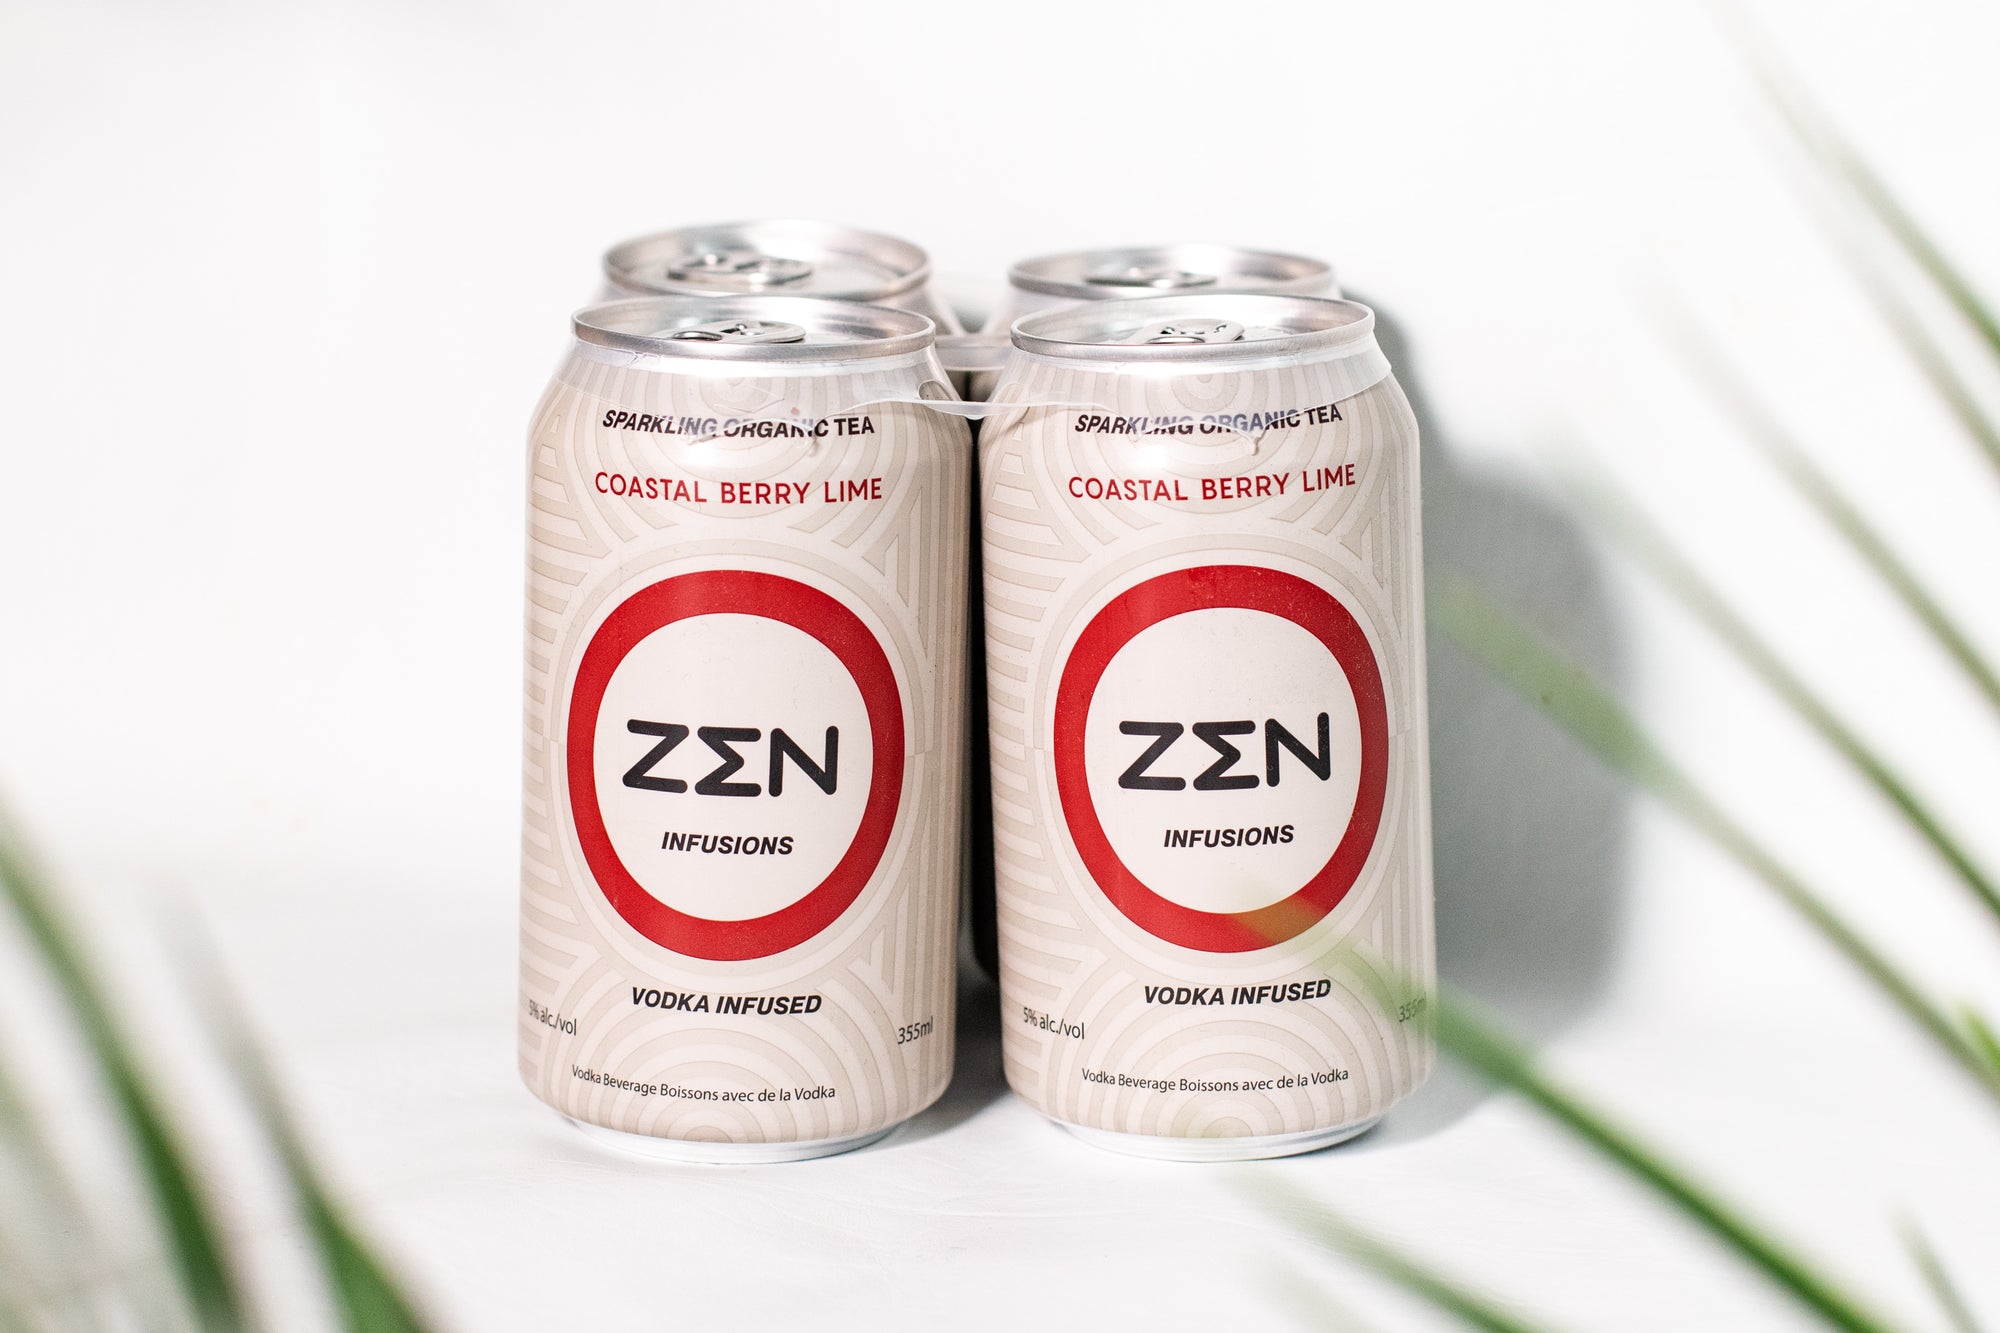 Zen Infusions - Coastal Berry Lime